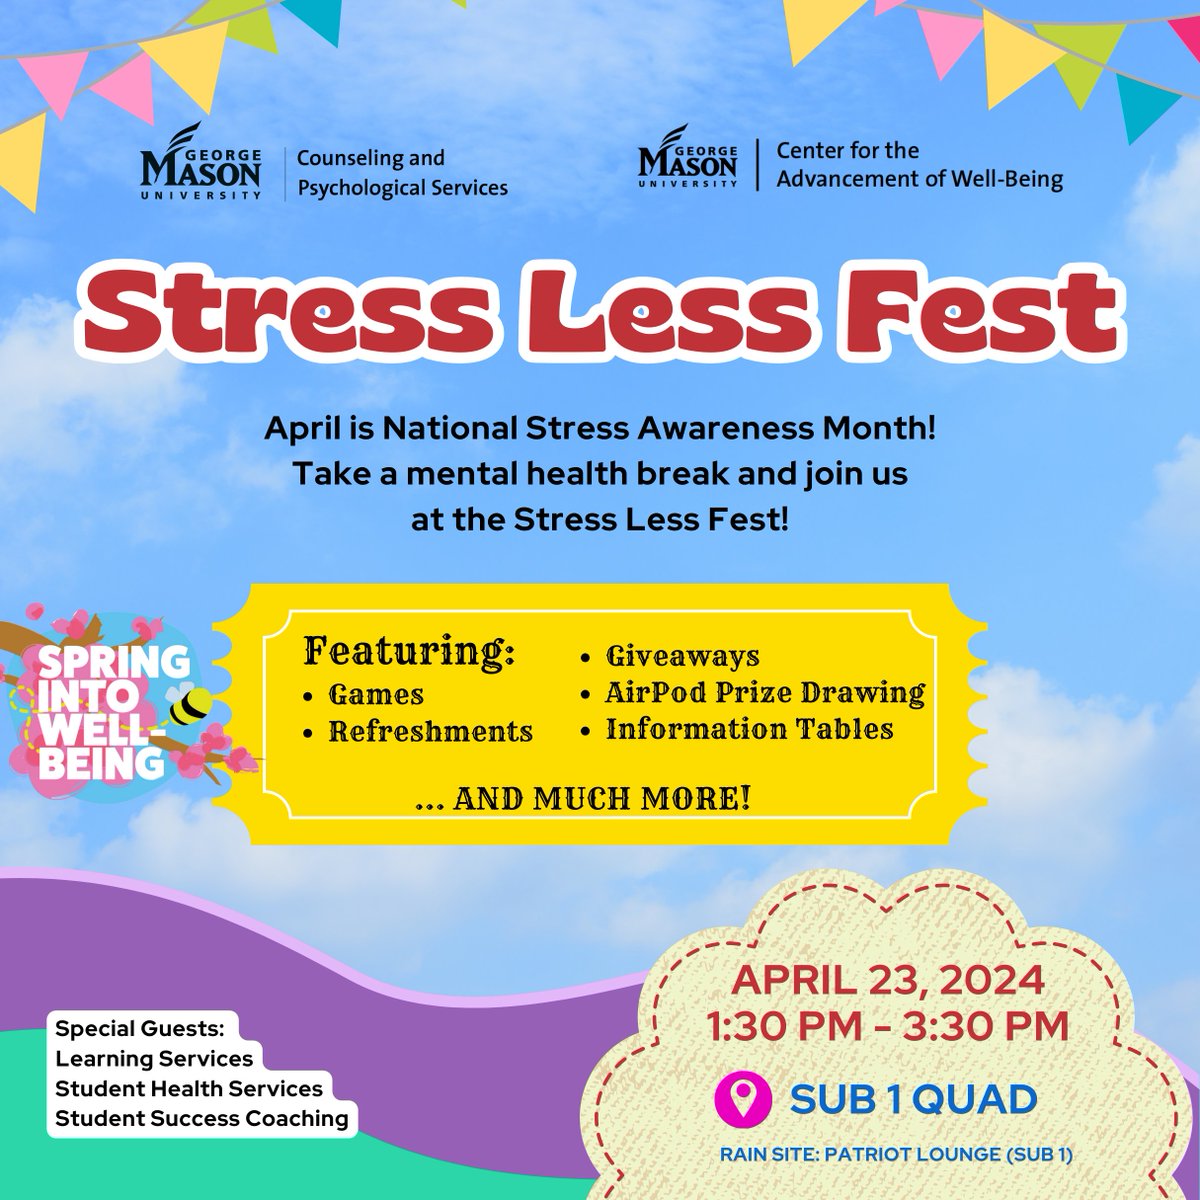 Join CAPS, @CWB_Mason , and other campus partners for refreshing treats, games, resources, giveaways, and more! This event is perfect for students looking to recharge and have some fun!